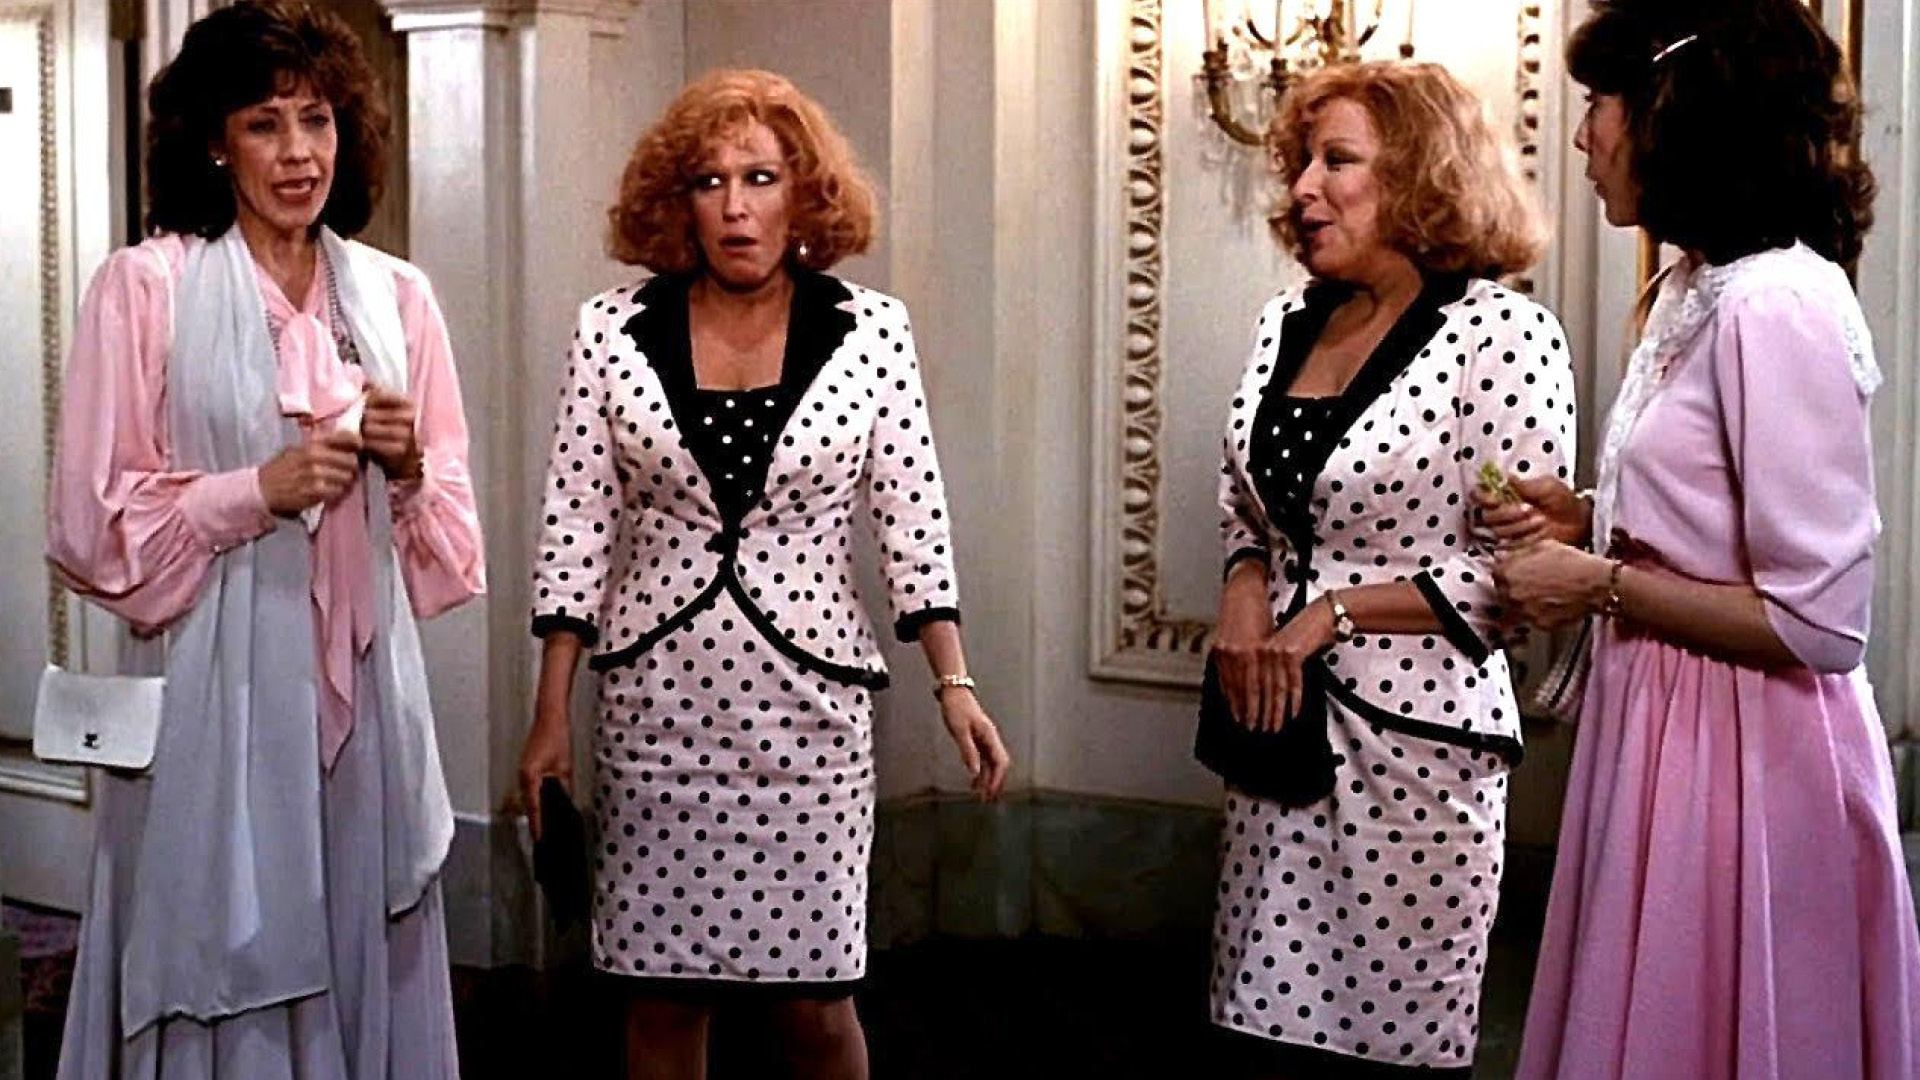 BIG BUSINESS film still of Bette Midler and Lily Tomlin